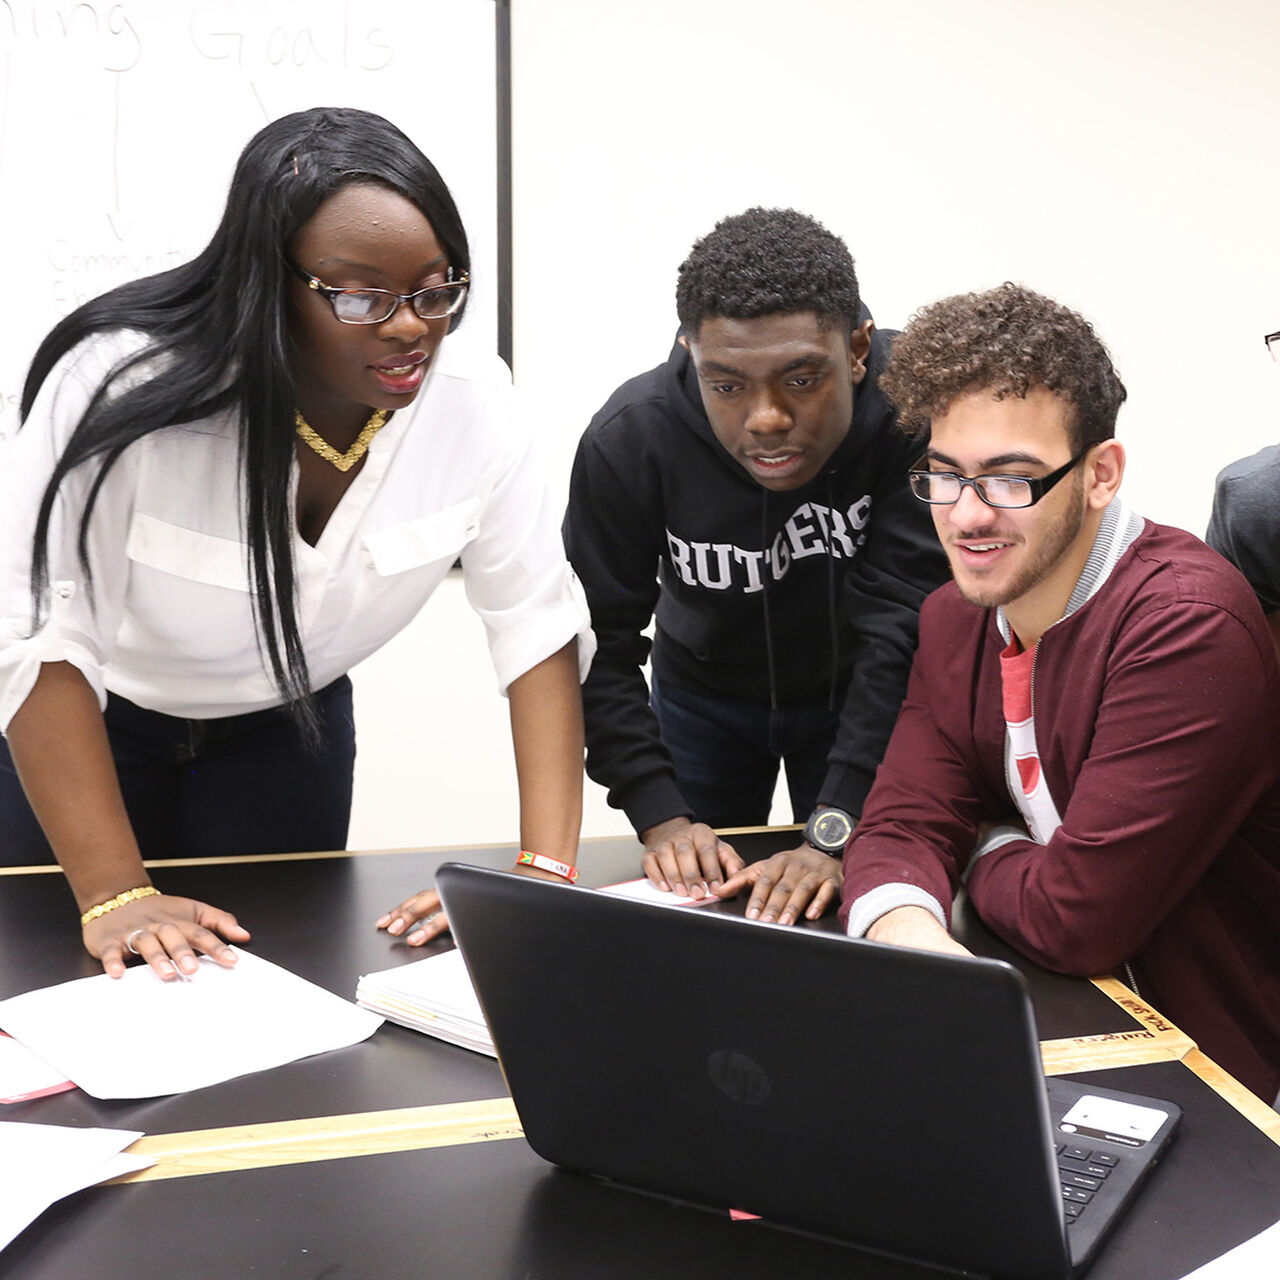 Students working in a classroom at Rutgers-Newark image number 2